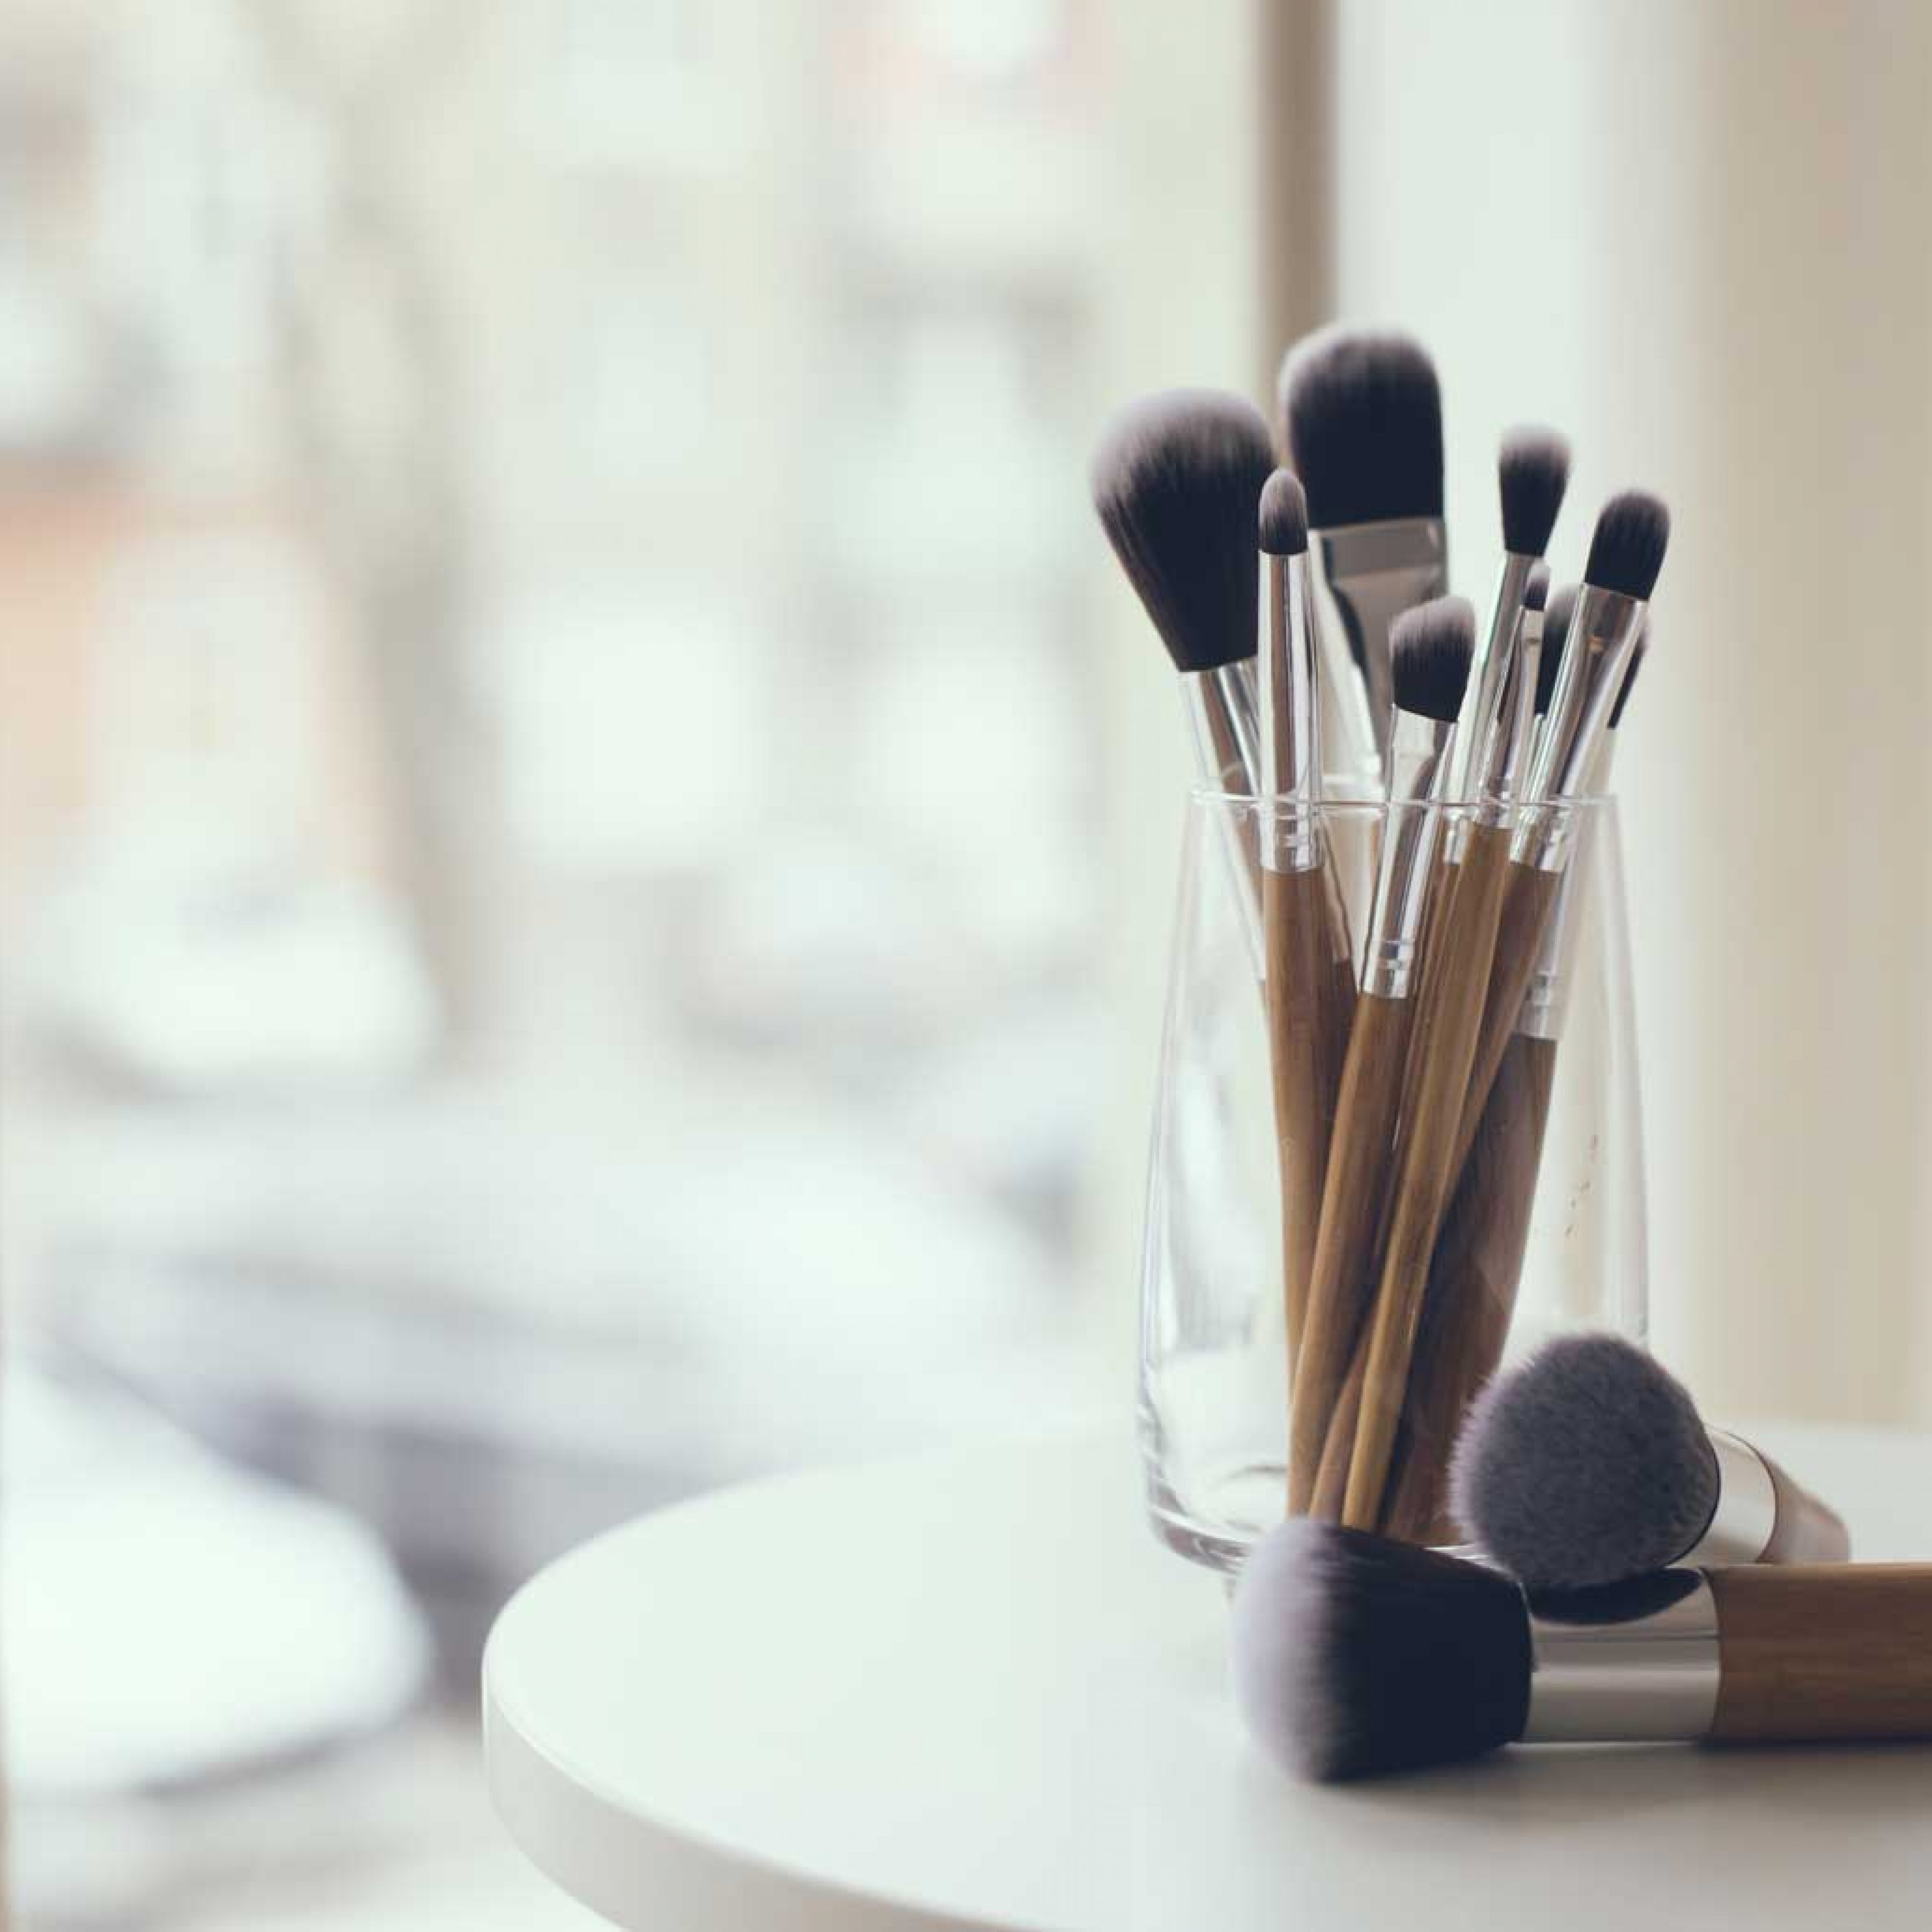 How to Clean Your Makeup Brushes in 5 Easy Steps